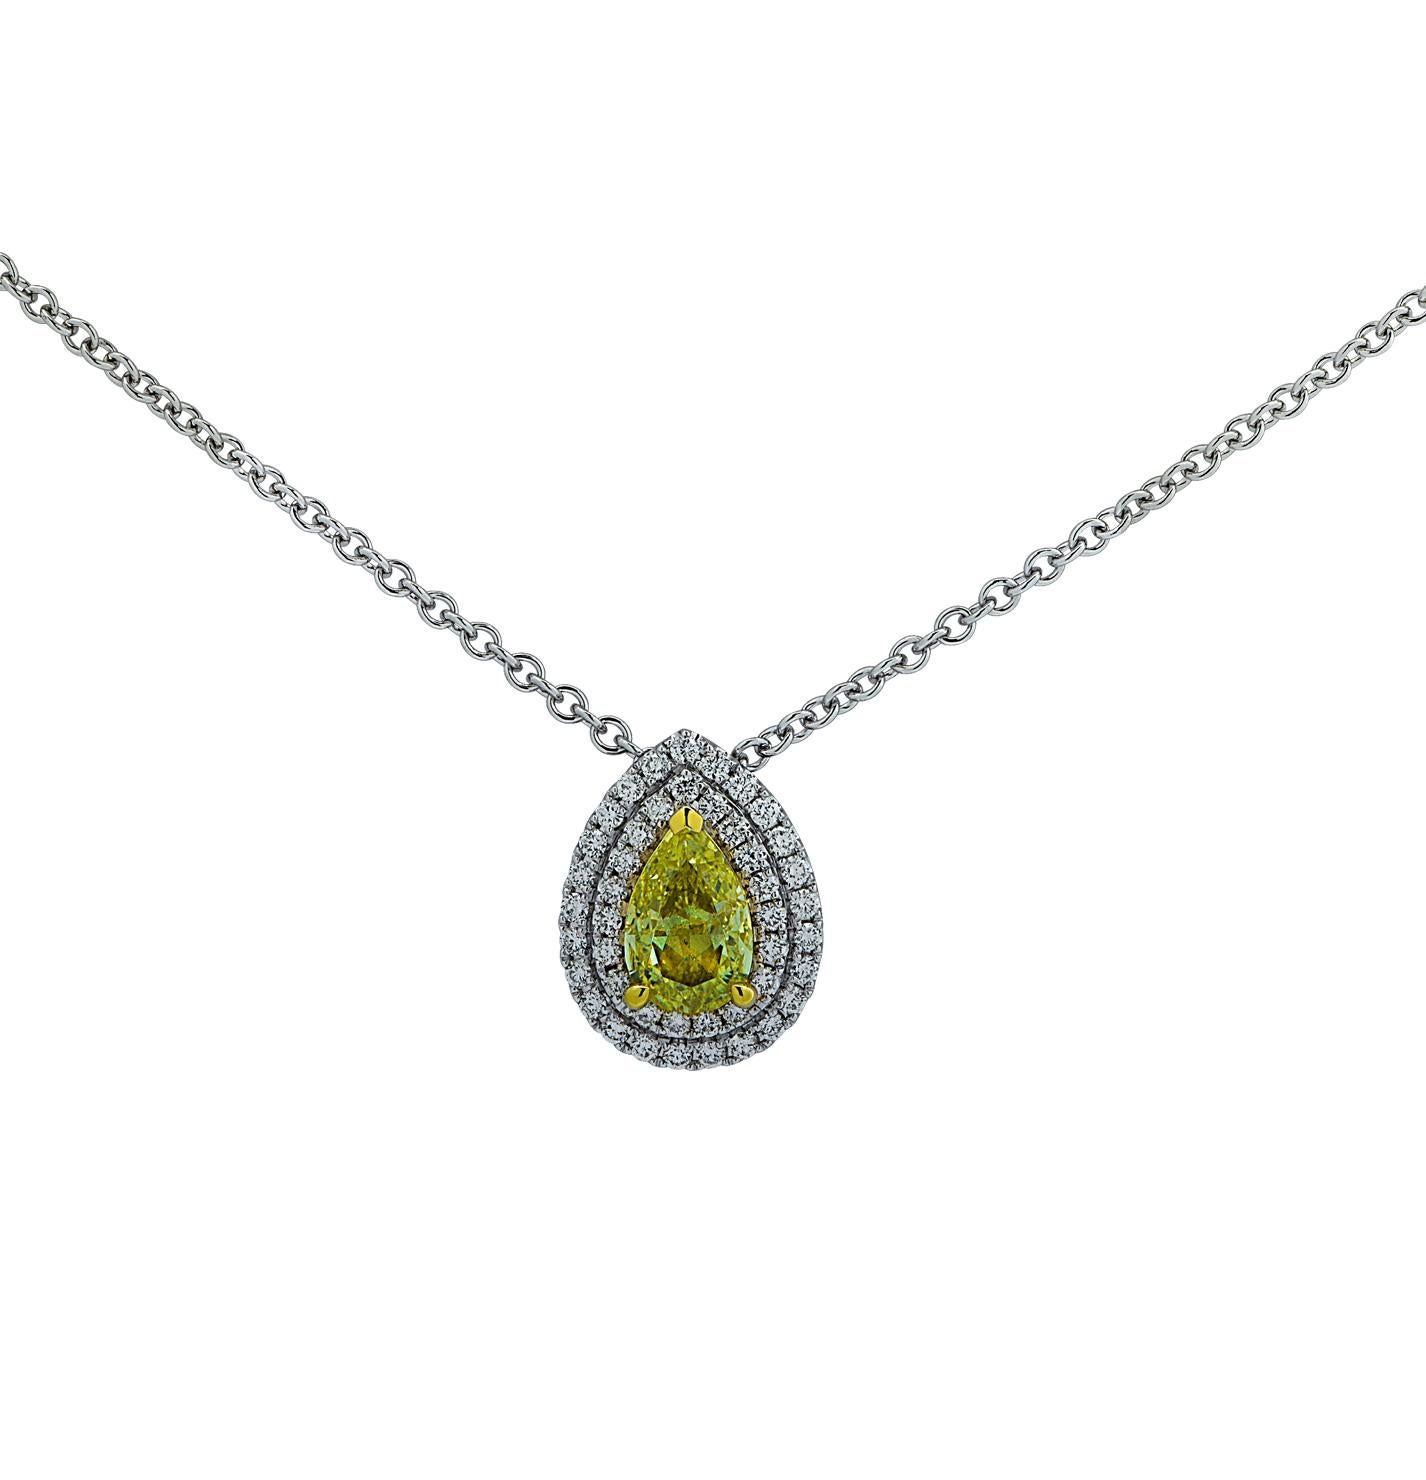 Vivid Diamonds GIA Certified 1.05 Carat Fancy Yellow Diamond Pendant Necklace In New Condition For Sale In Miami, FL